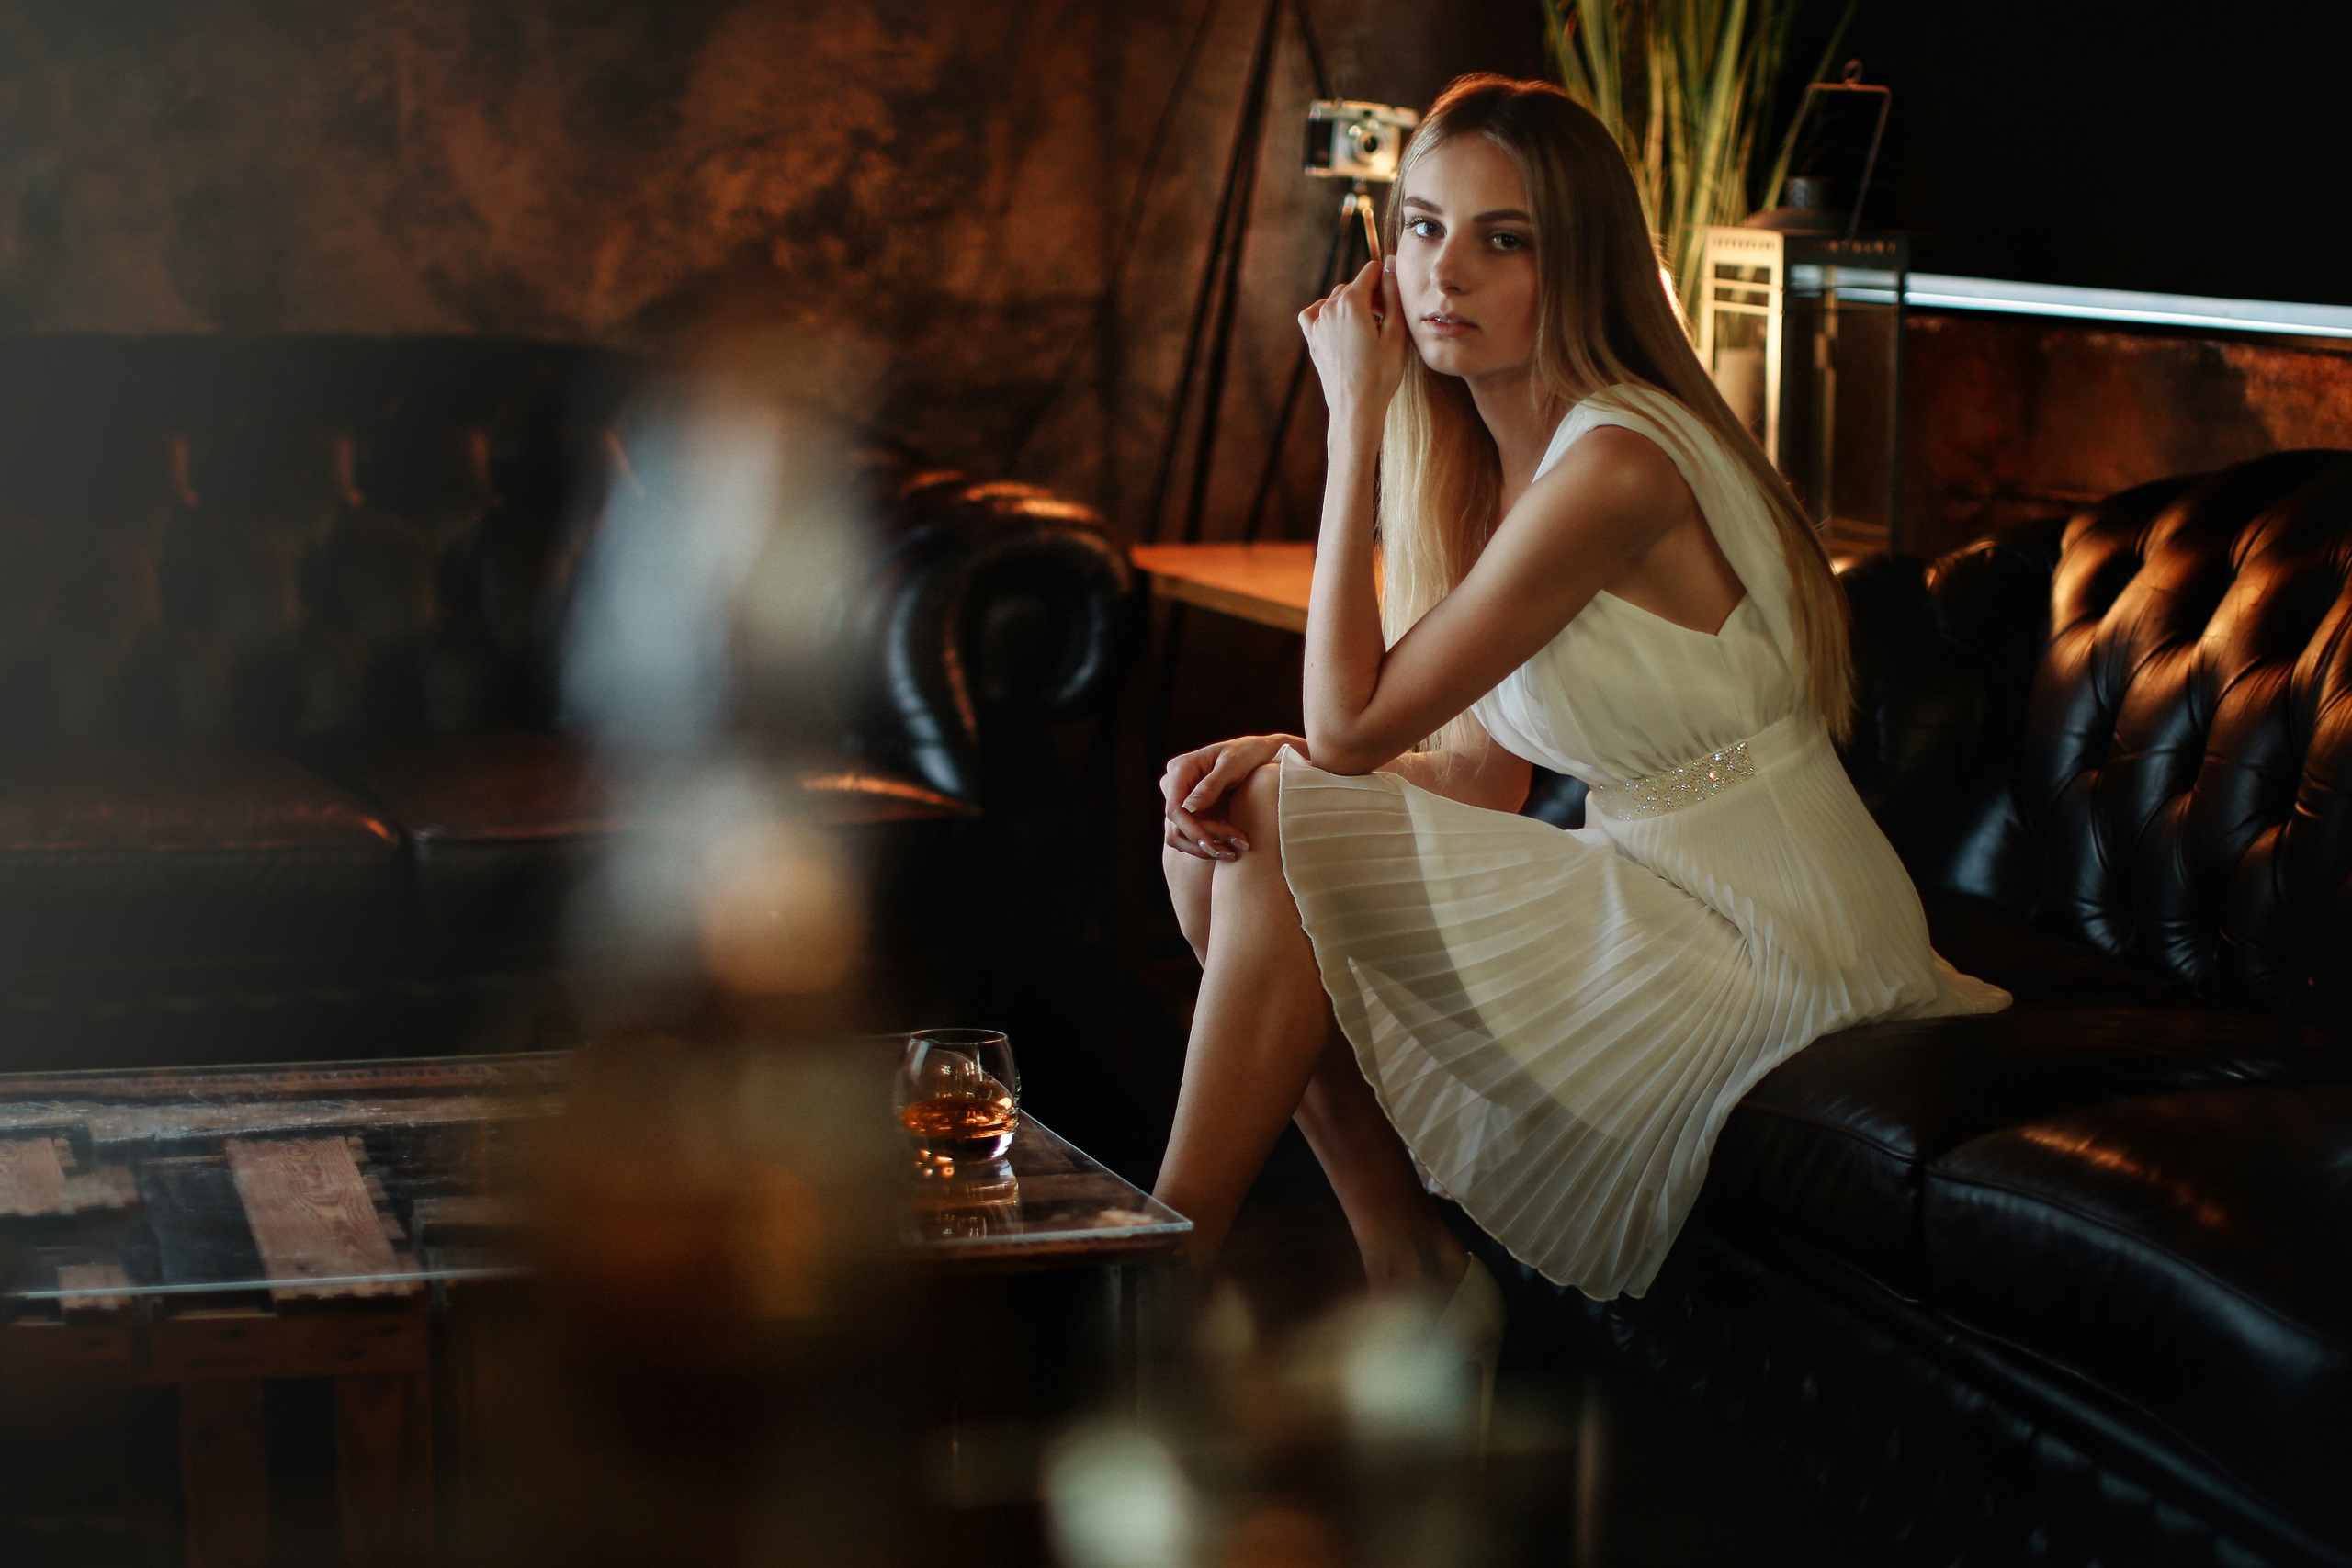 People 2560x1707 model indoors women women indoors sitting dress white dress looking at viewer cocktails classy on sofa black couch leather couch drinking glass hand on leg one arm up open mouth glamour girls